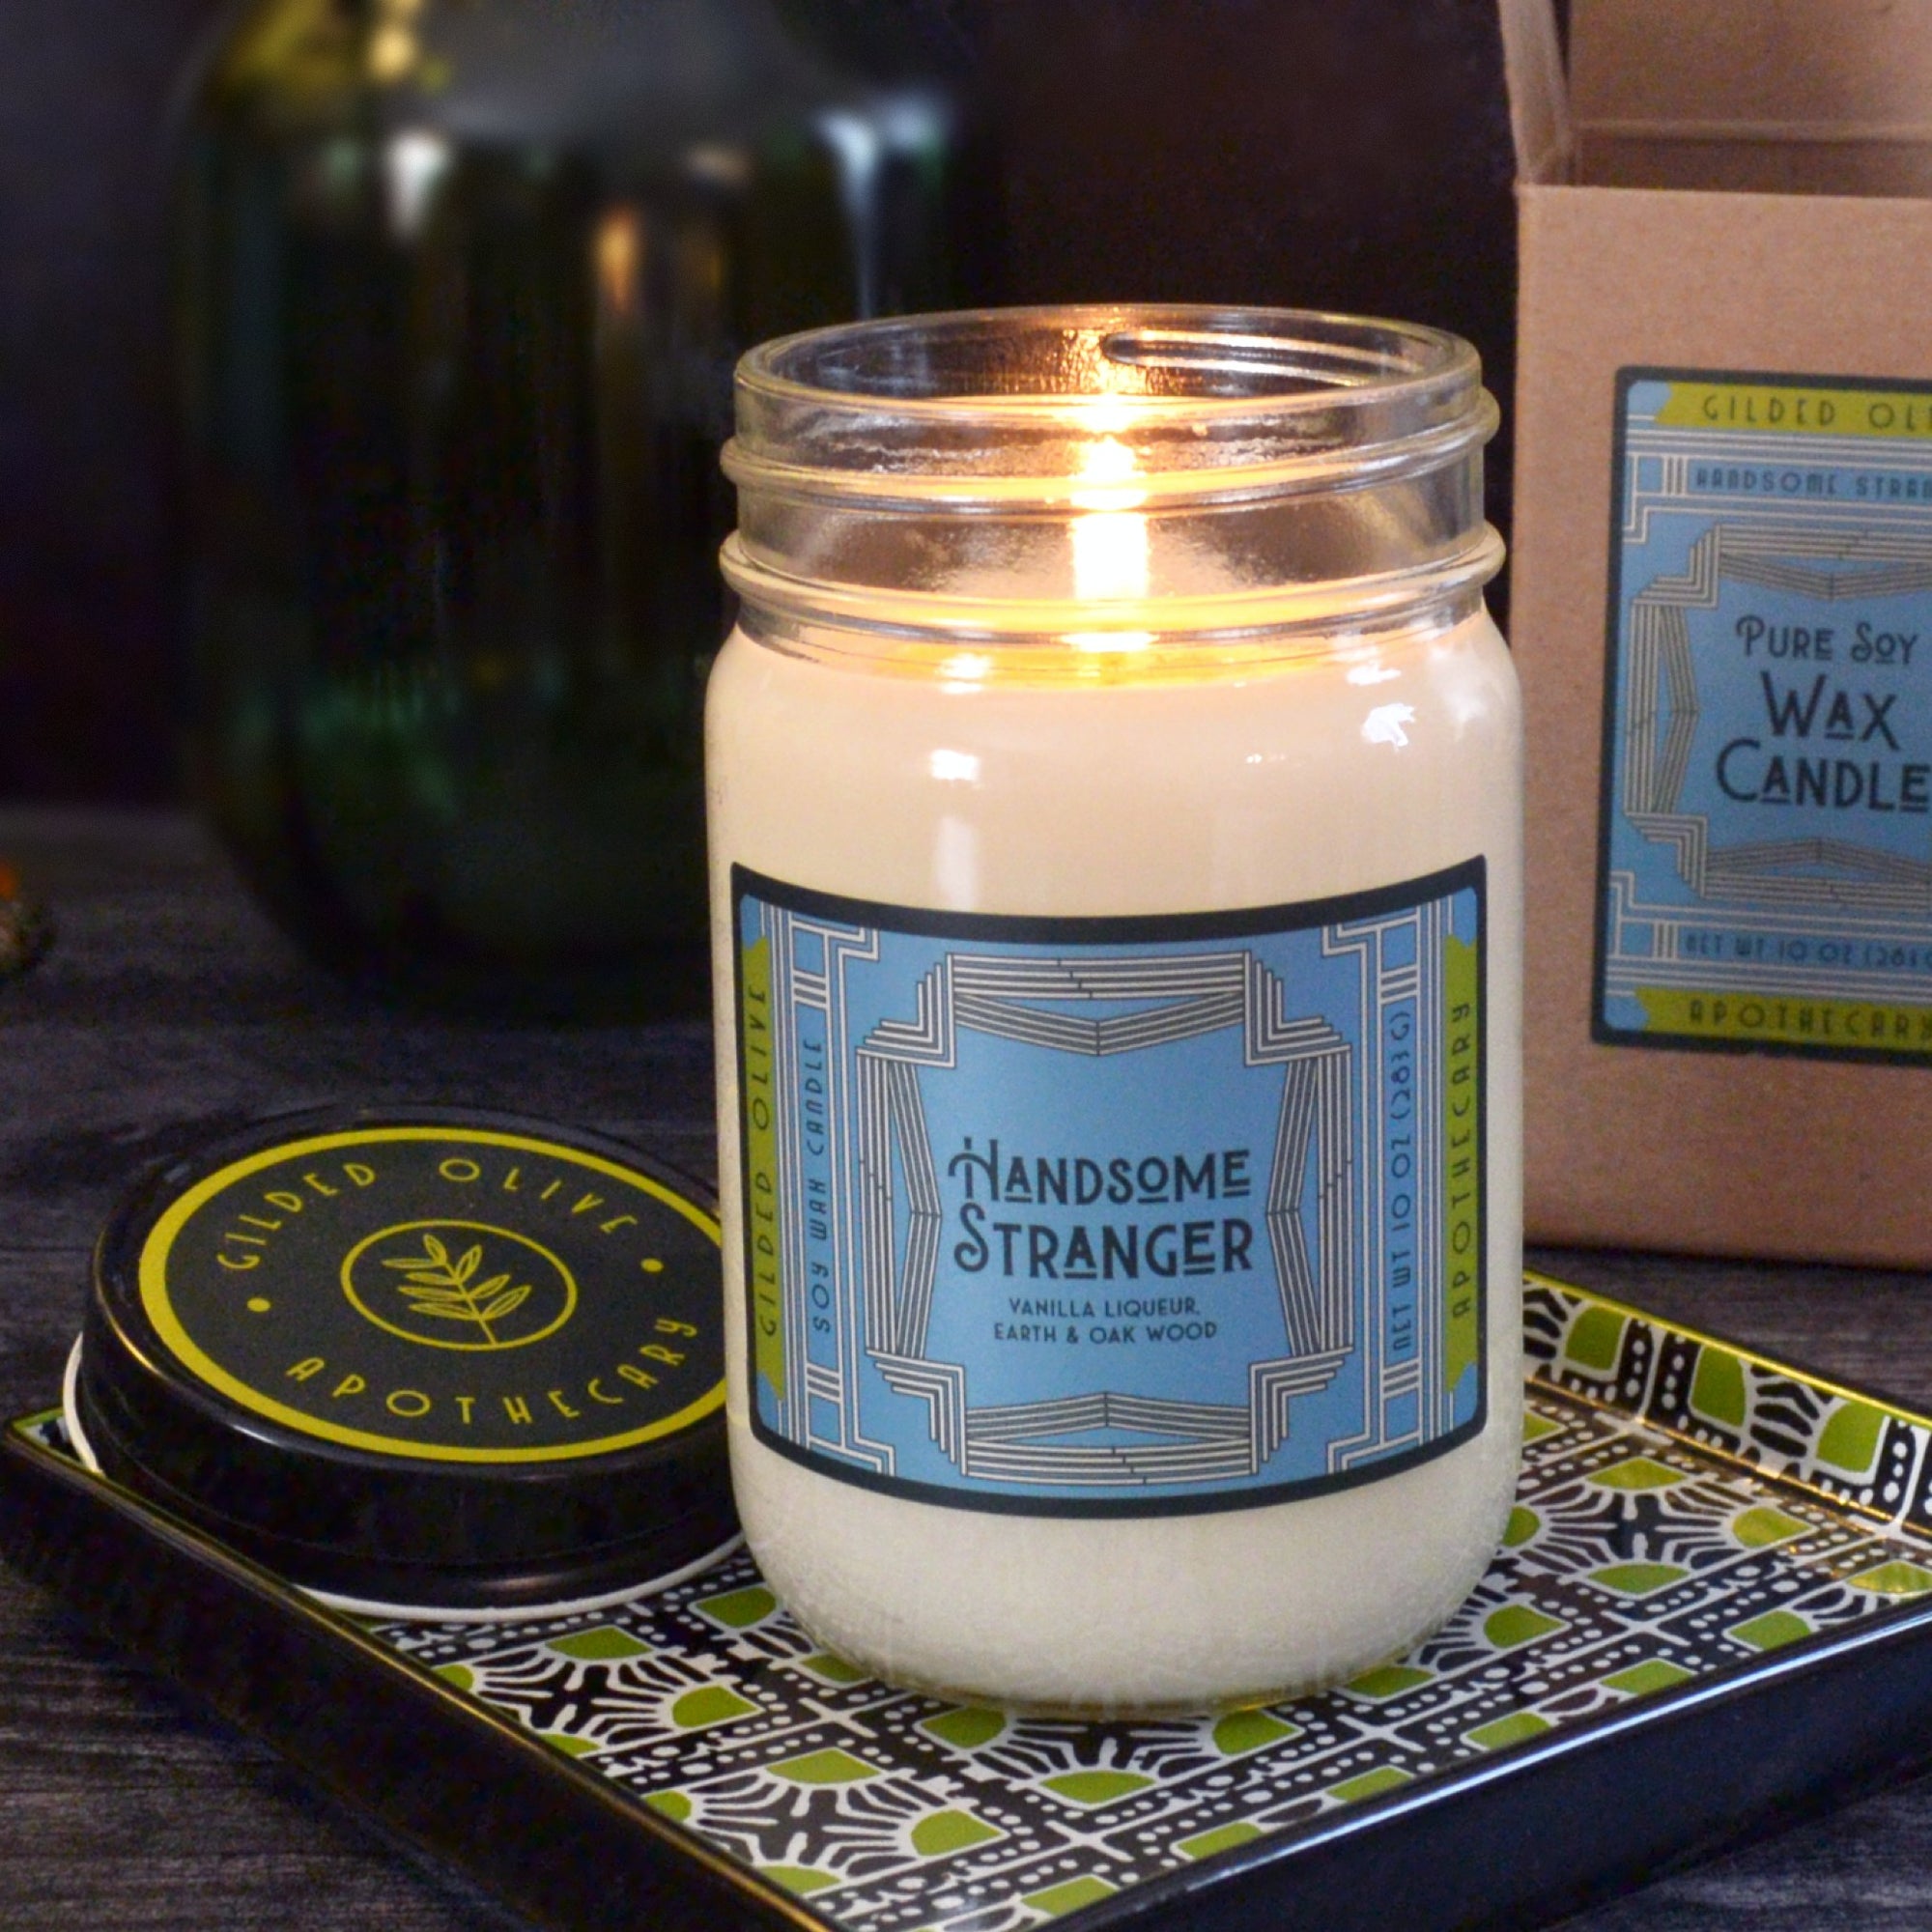 Handsome Stranger Vanilla & Oak Soy Wax Candle | Gilded Olive Apothecary